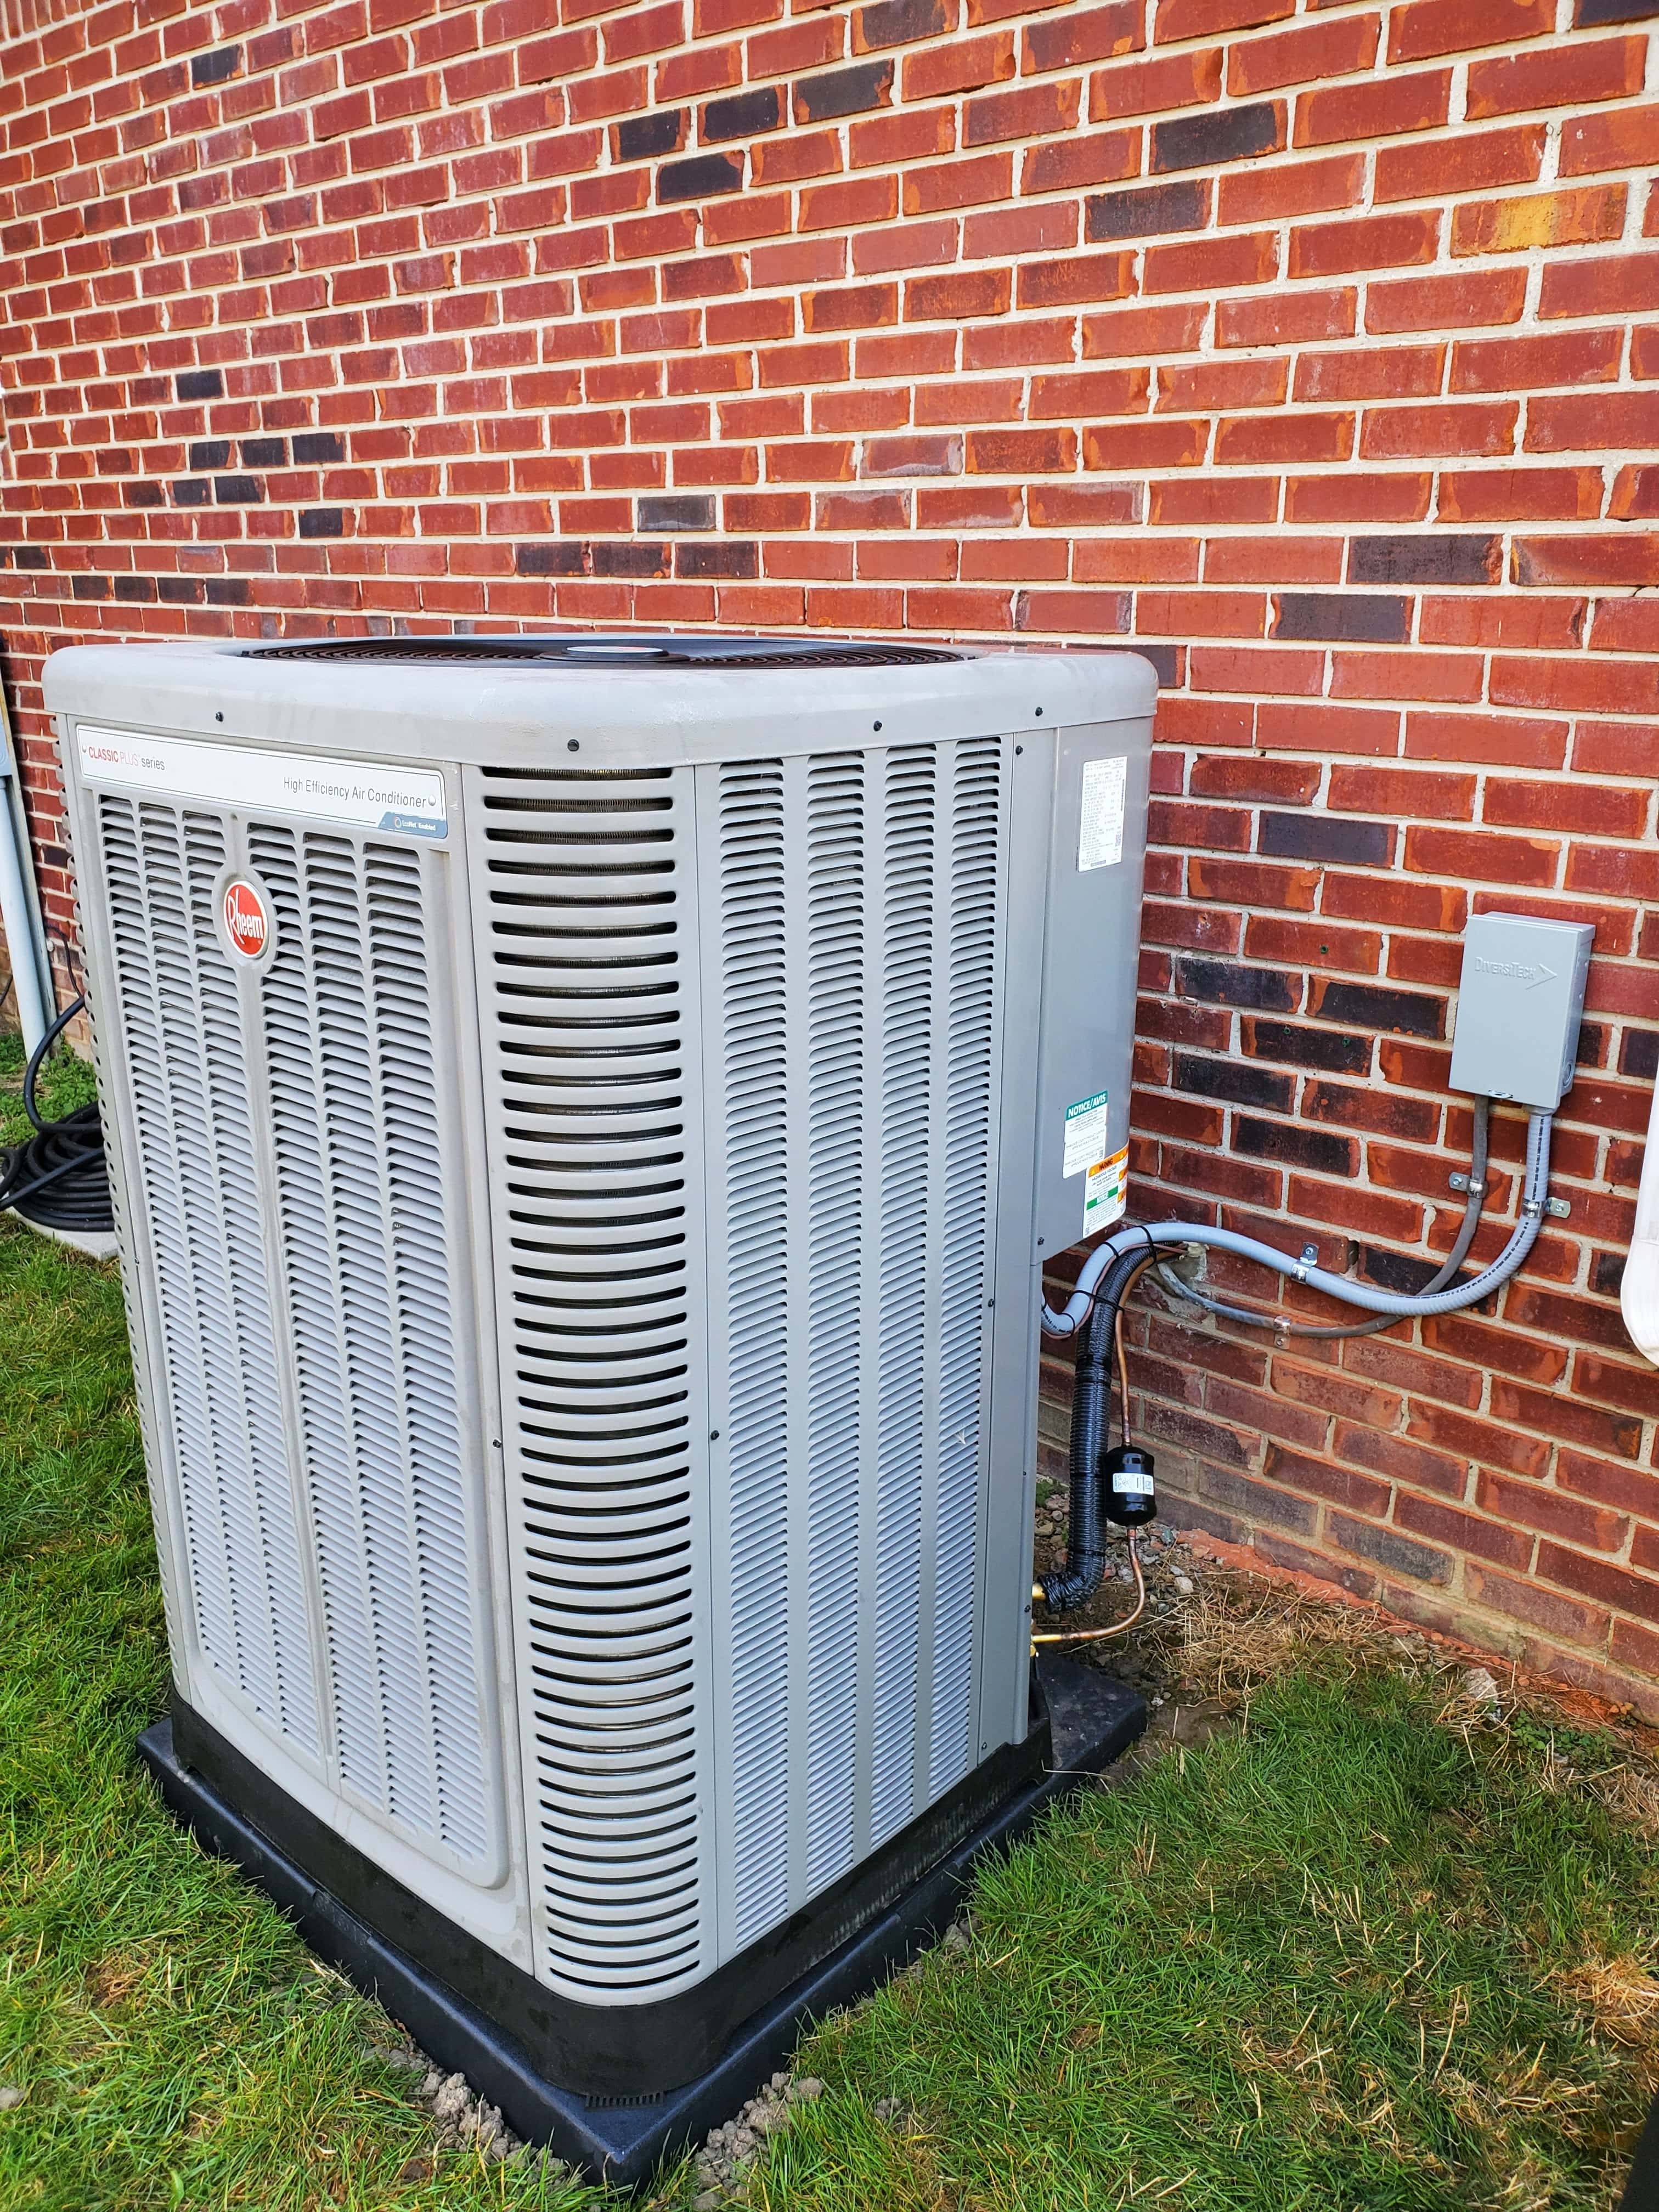 Flo-Aire Heating, Cooling & Electrical, Inc. - Southgate, MI, US, furnace repair